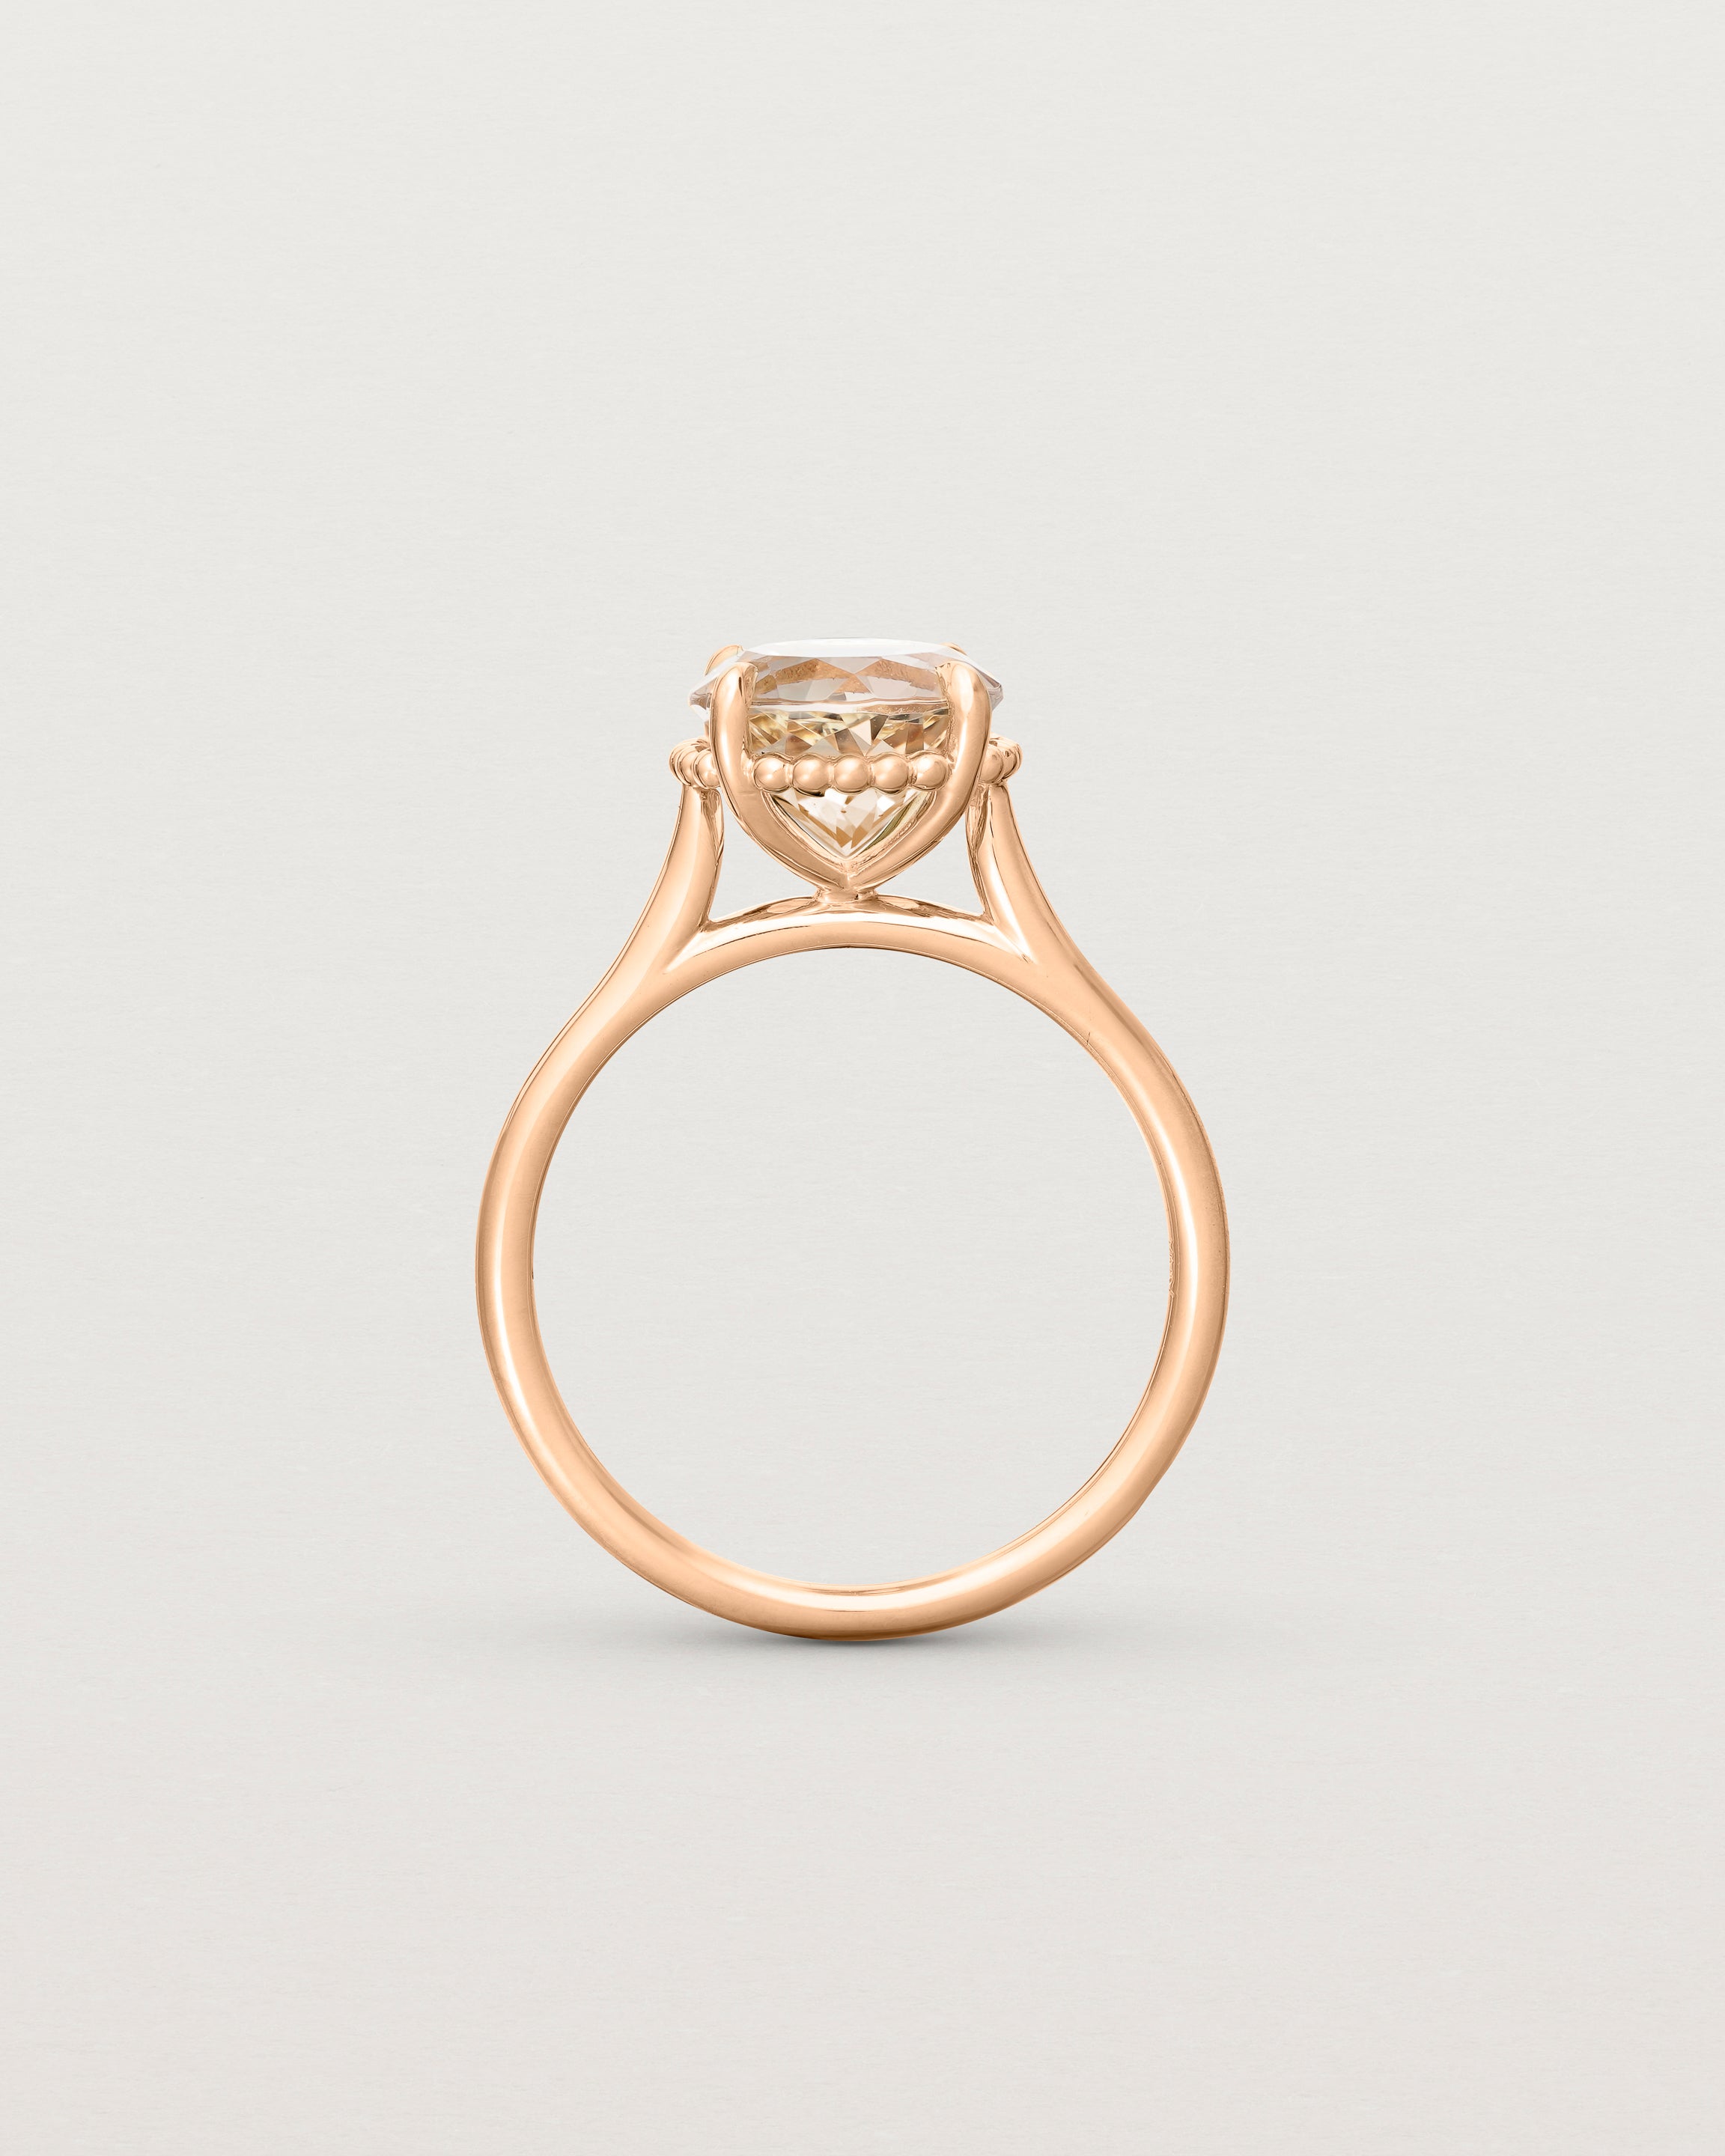 Standing view of the Thea Round Solitaire | Savannah Sunstone in rose gold.